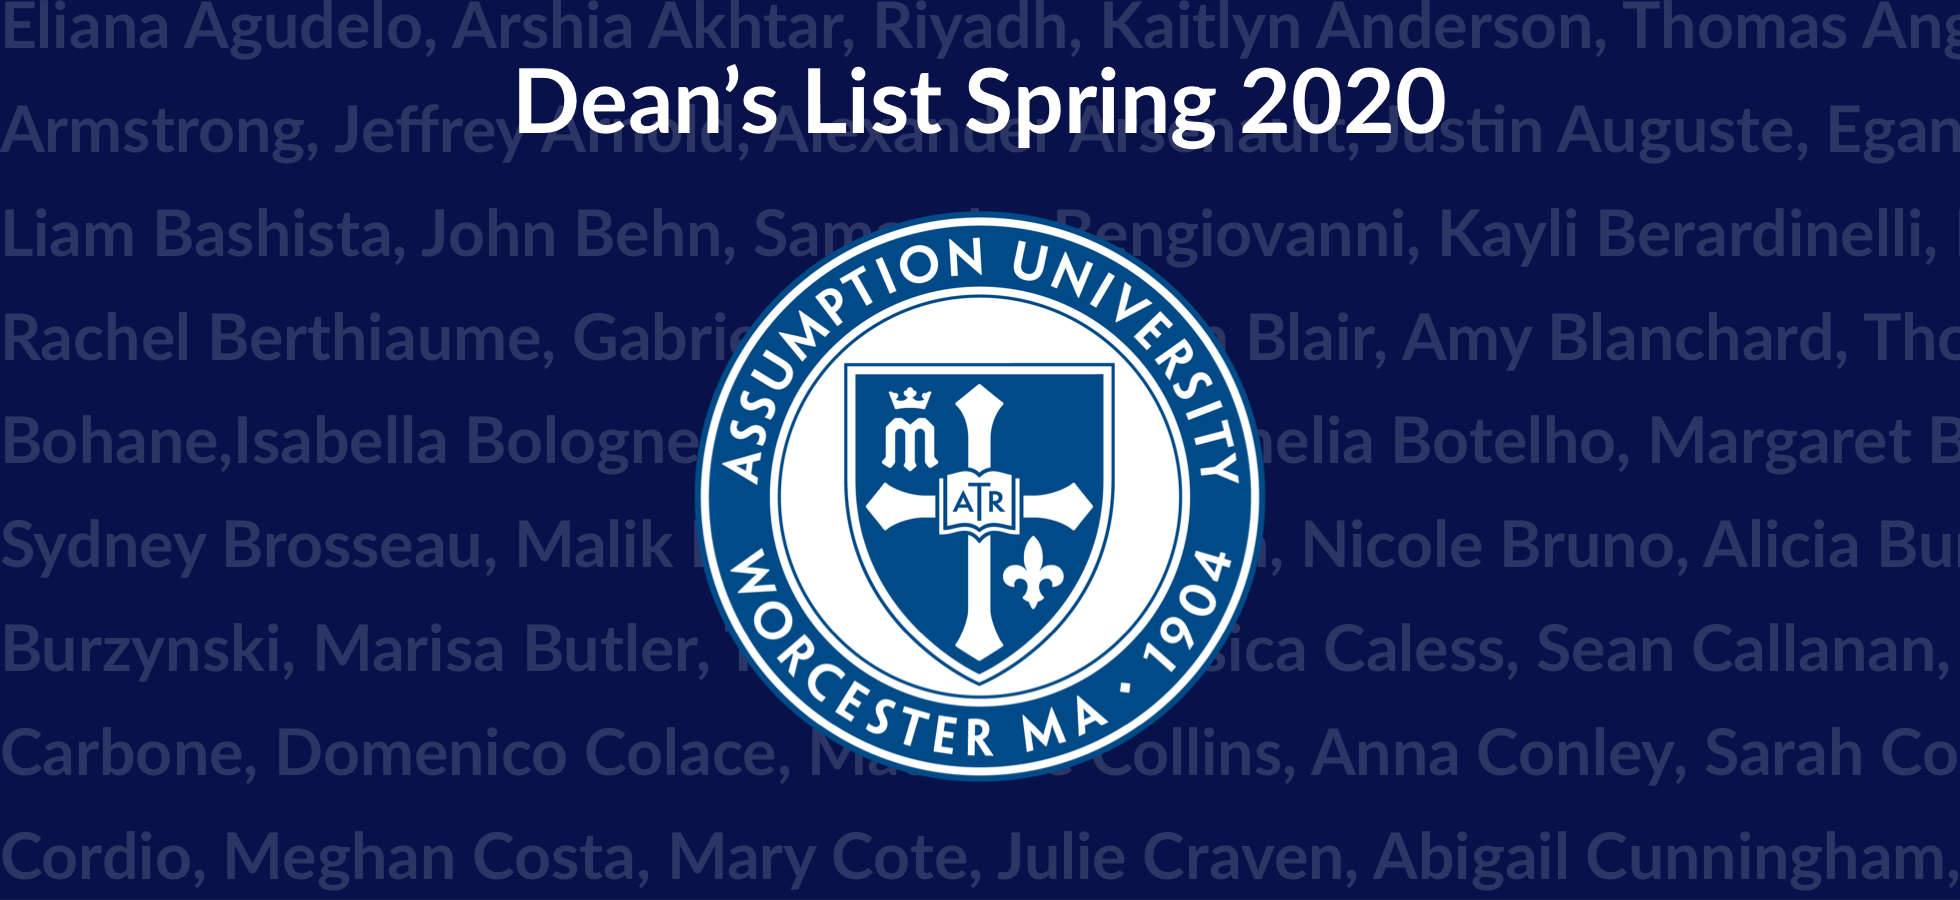 Assumption University graphic that includes names of those students named to the Spring 2020 Dean's List.